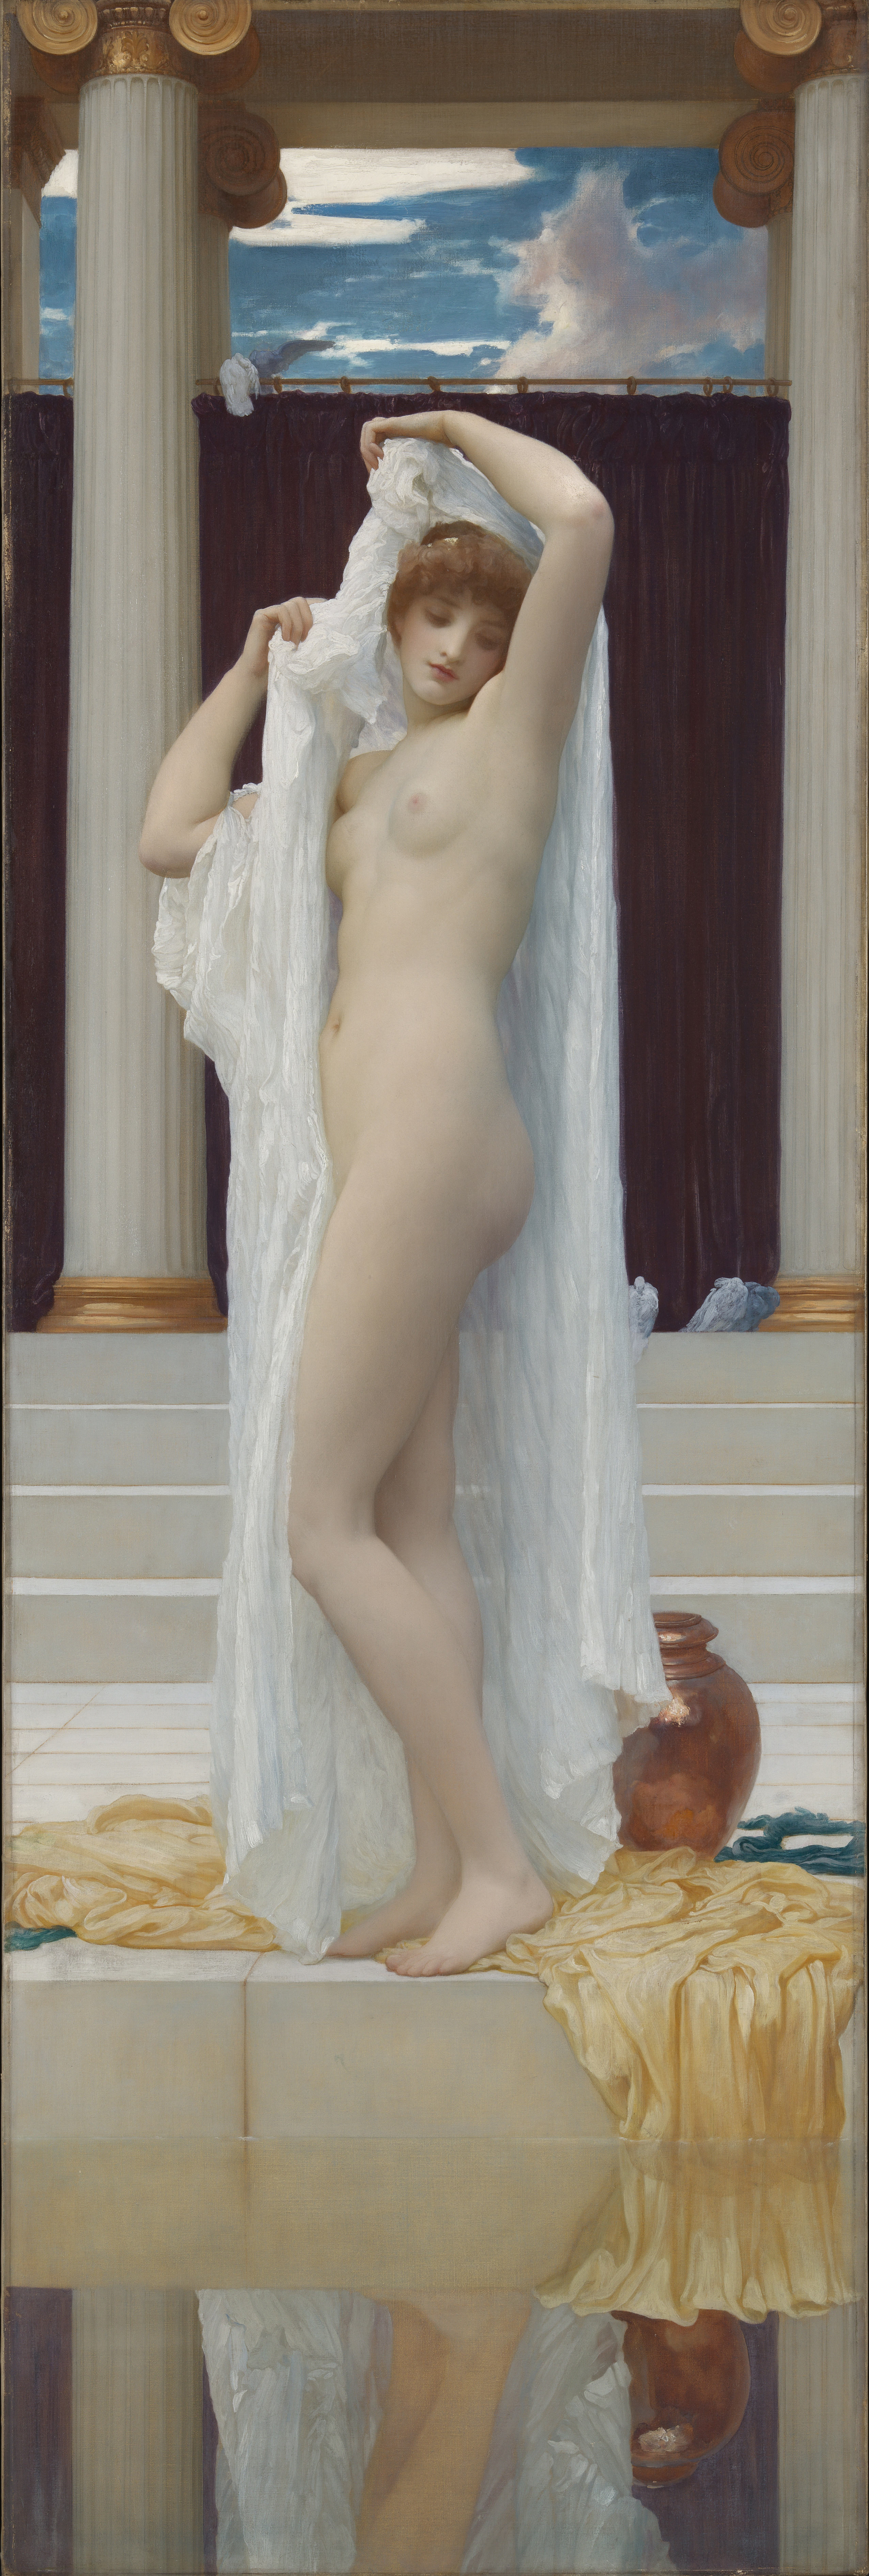 exhibited 1890, oil on canvas, 189.2 x 62.2 cm. Collection of Tate, London (N01574).